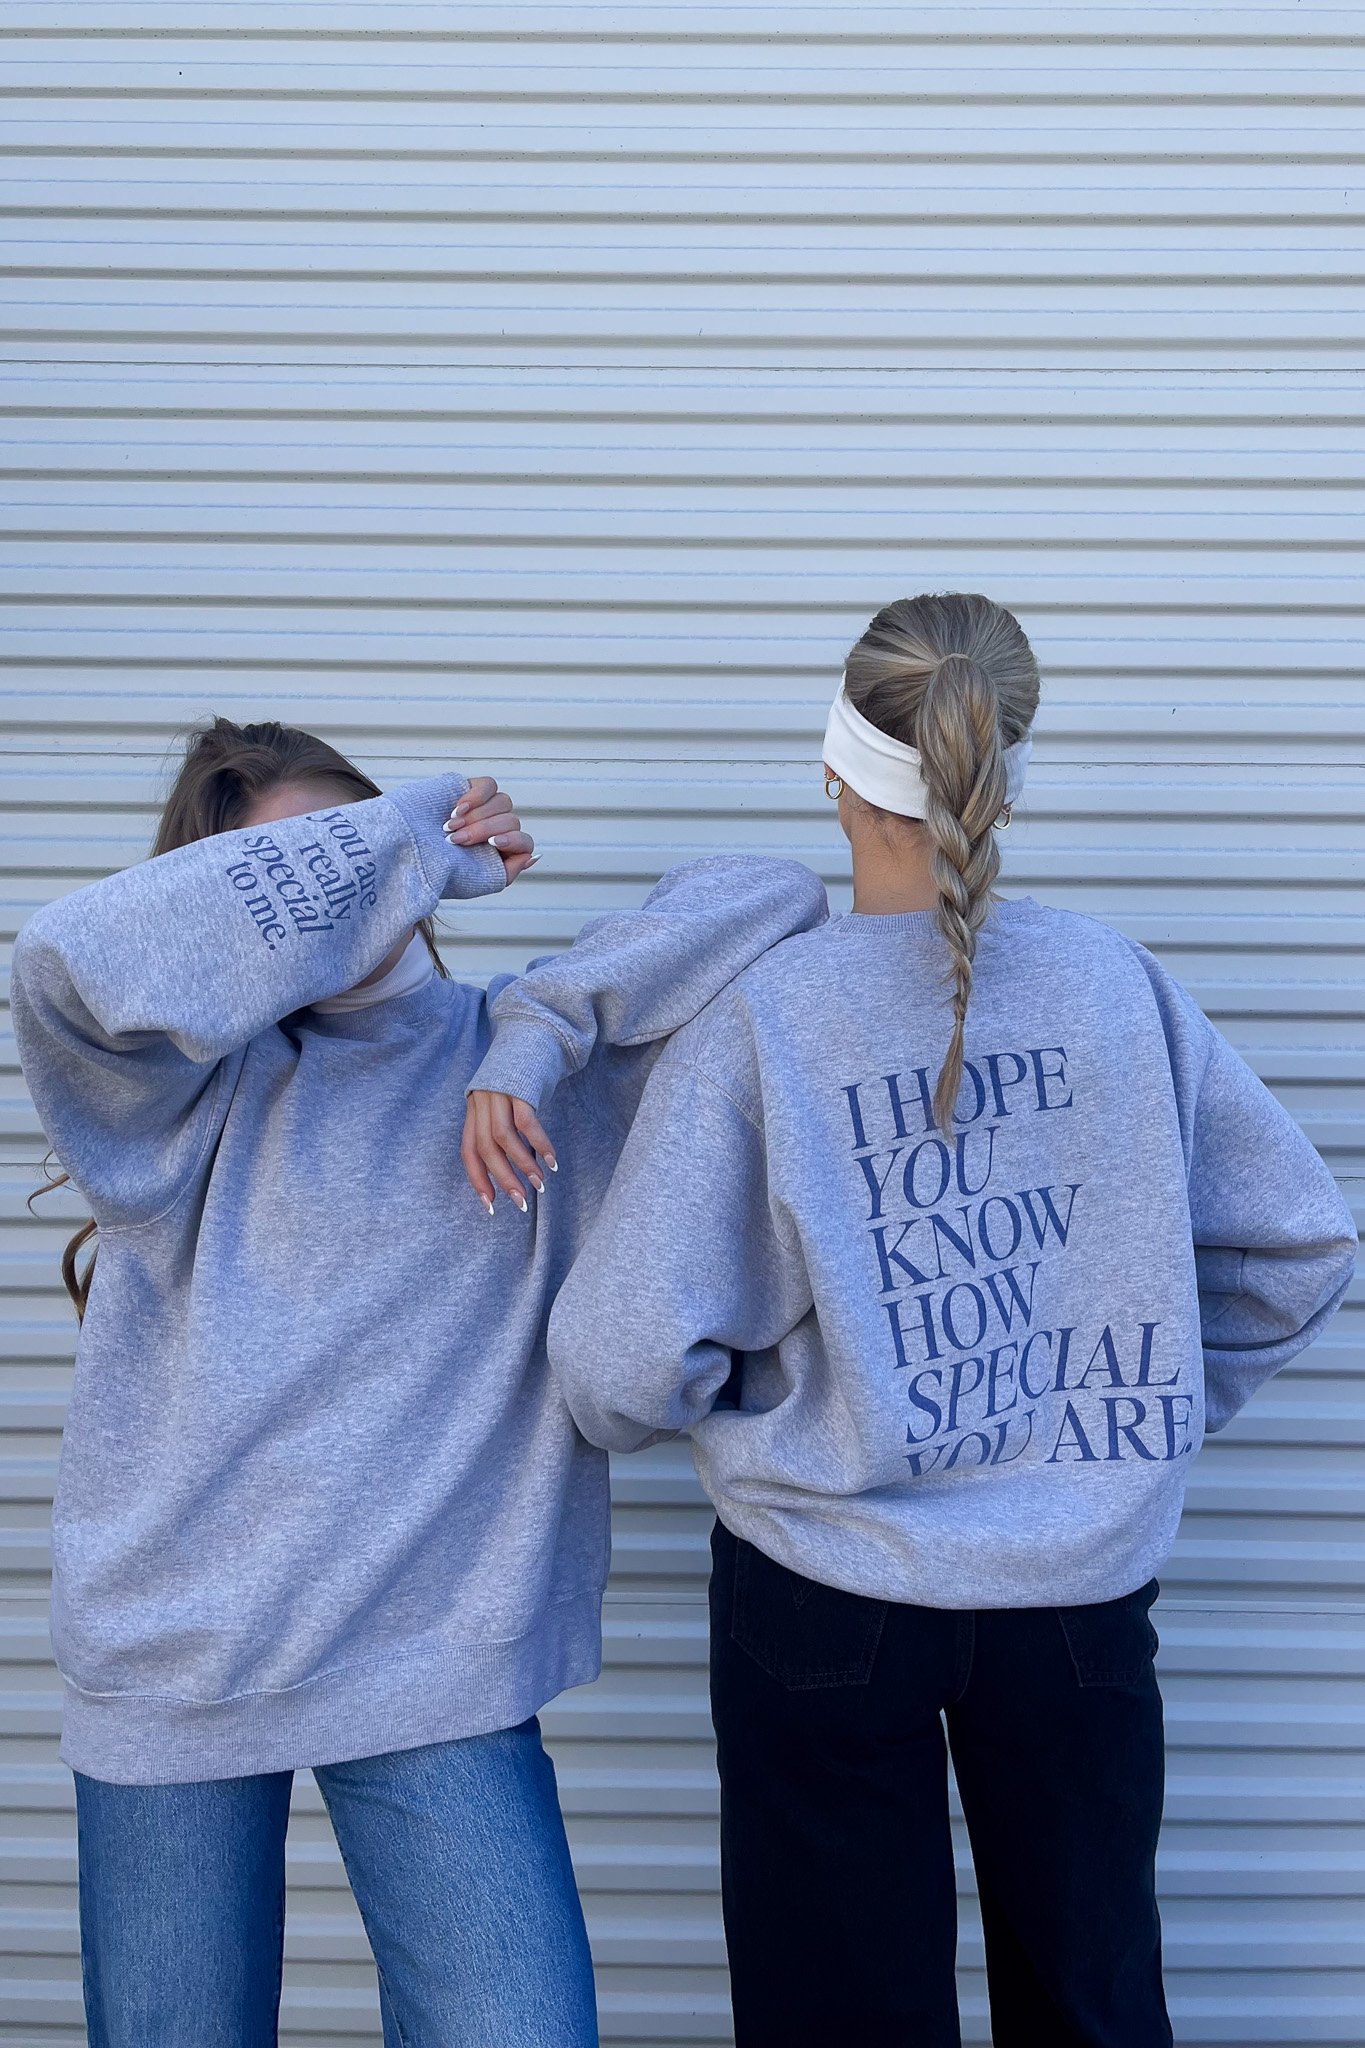 especially-you-heather-grey-crew-neck-sweater-charity-compassion-kindness-pullover-02.jpg